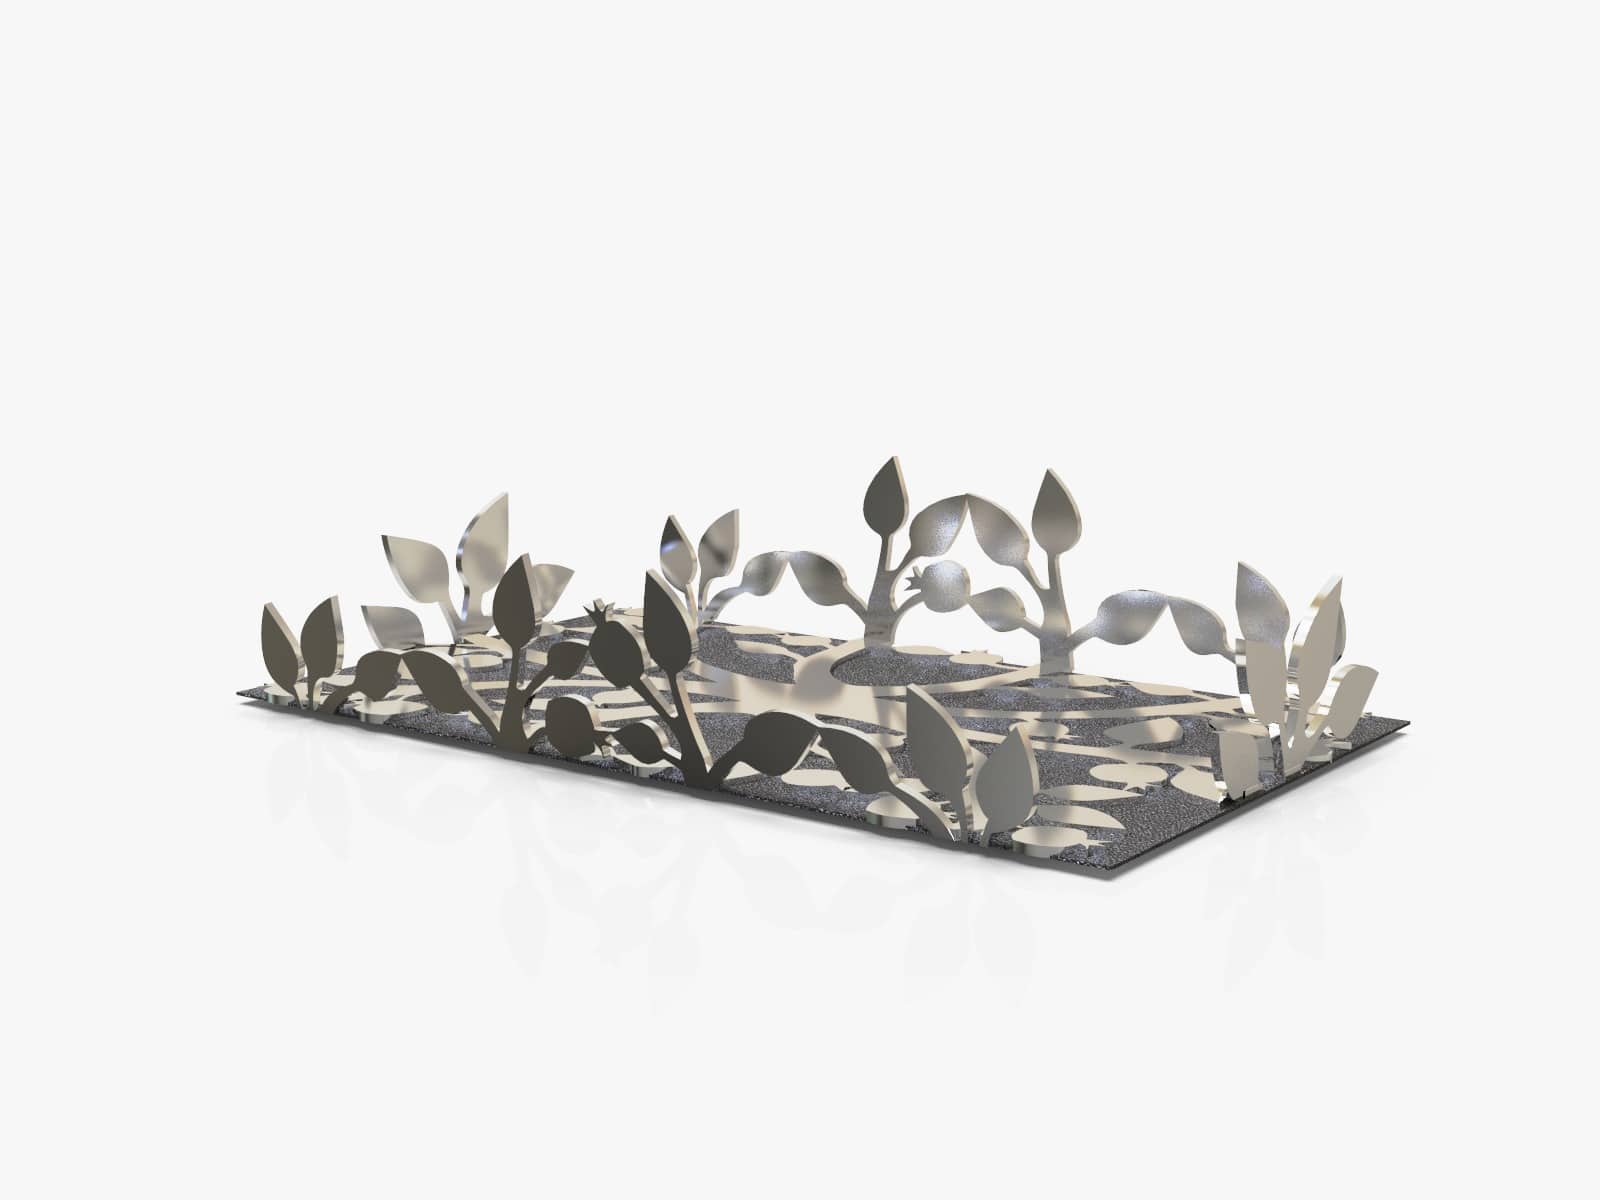 Beautiful Floral Sterling Silver Tray